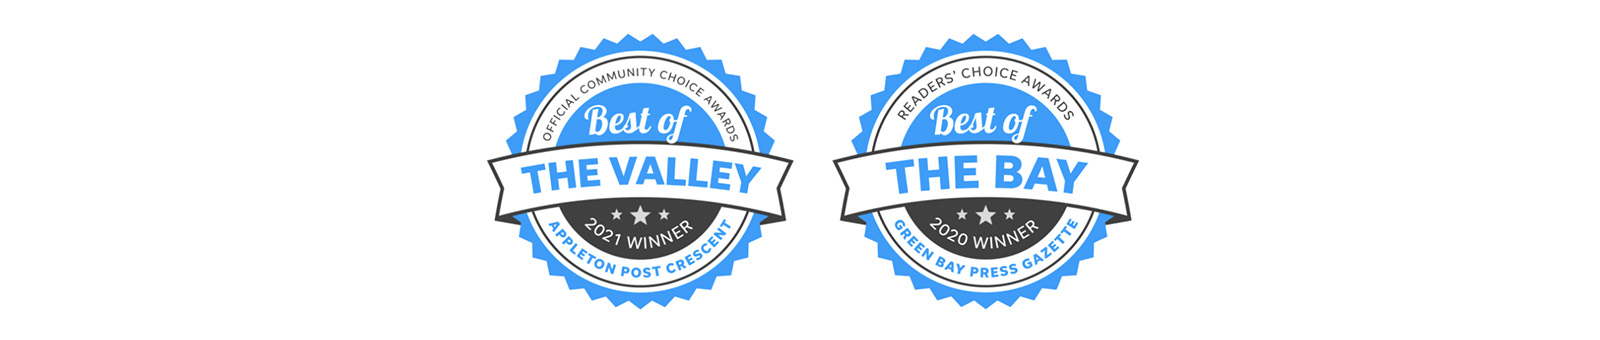 best of the valley & best of the bay badges